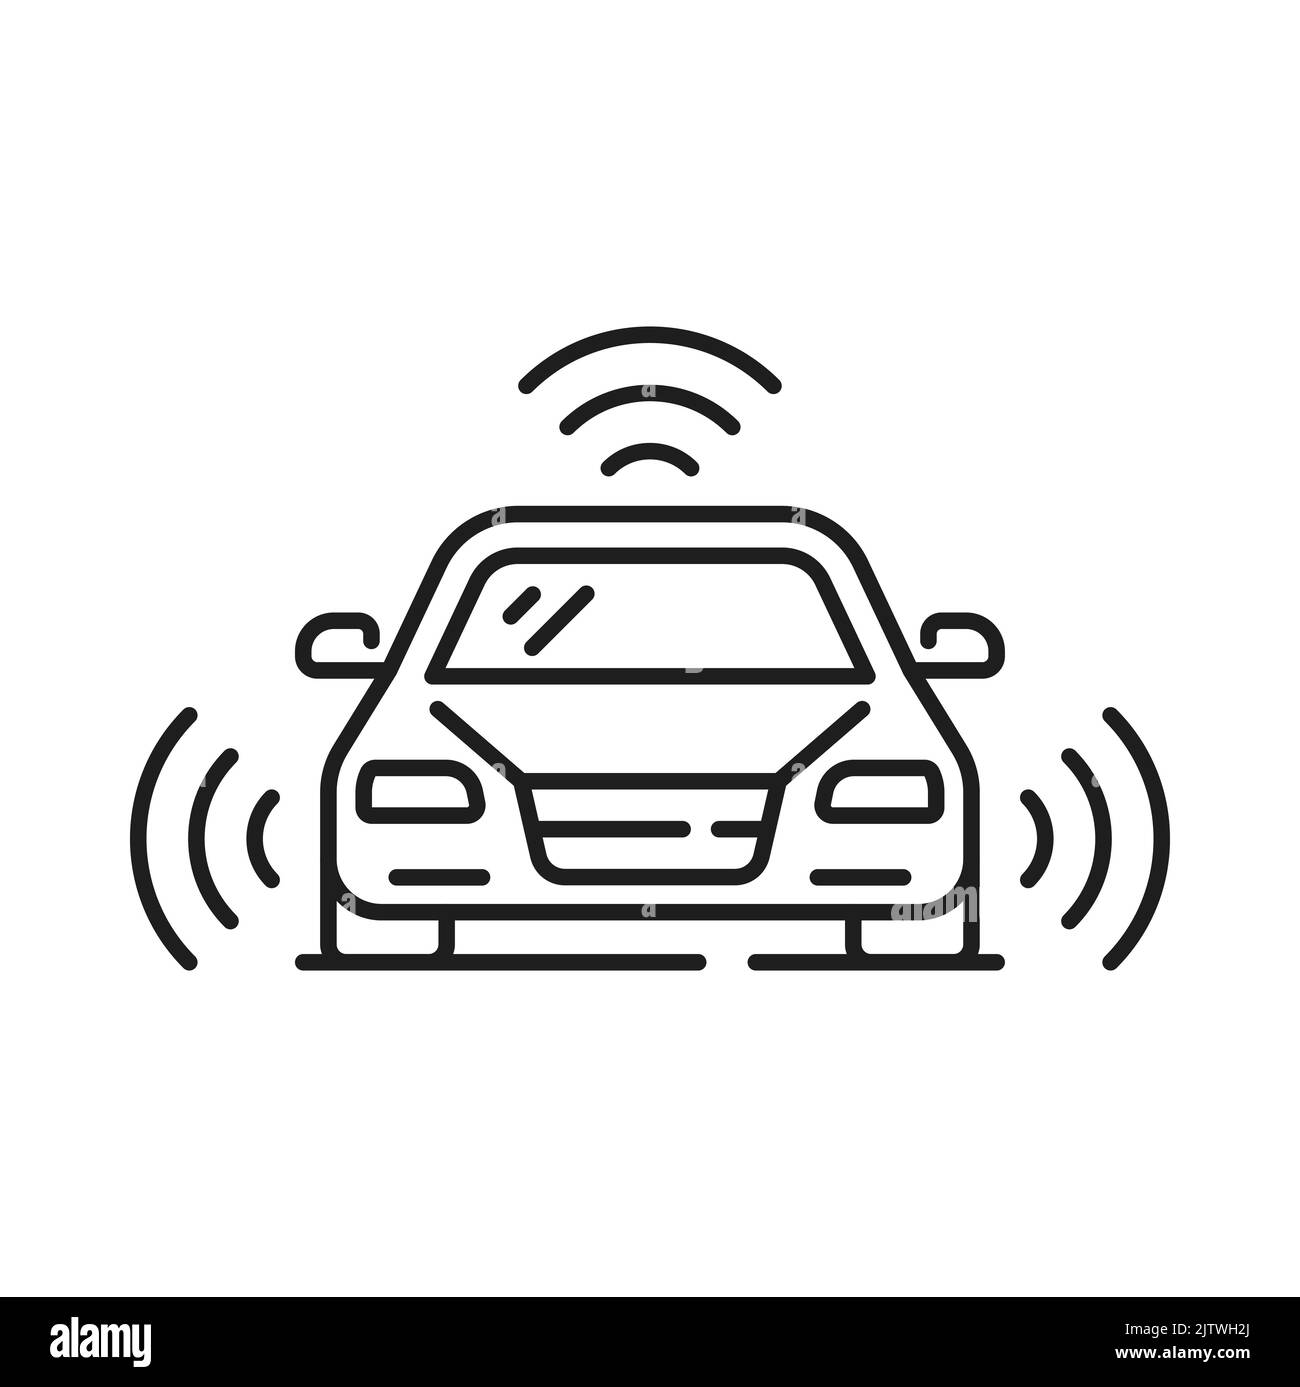 Driverless car or self driving vehicle icon with smart sensors, vector future technology. Self driving car or autonomous vehicle with automatic transport system of road radars and cameras Stock Vector